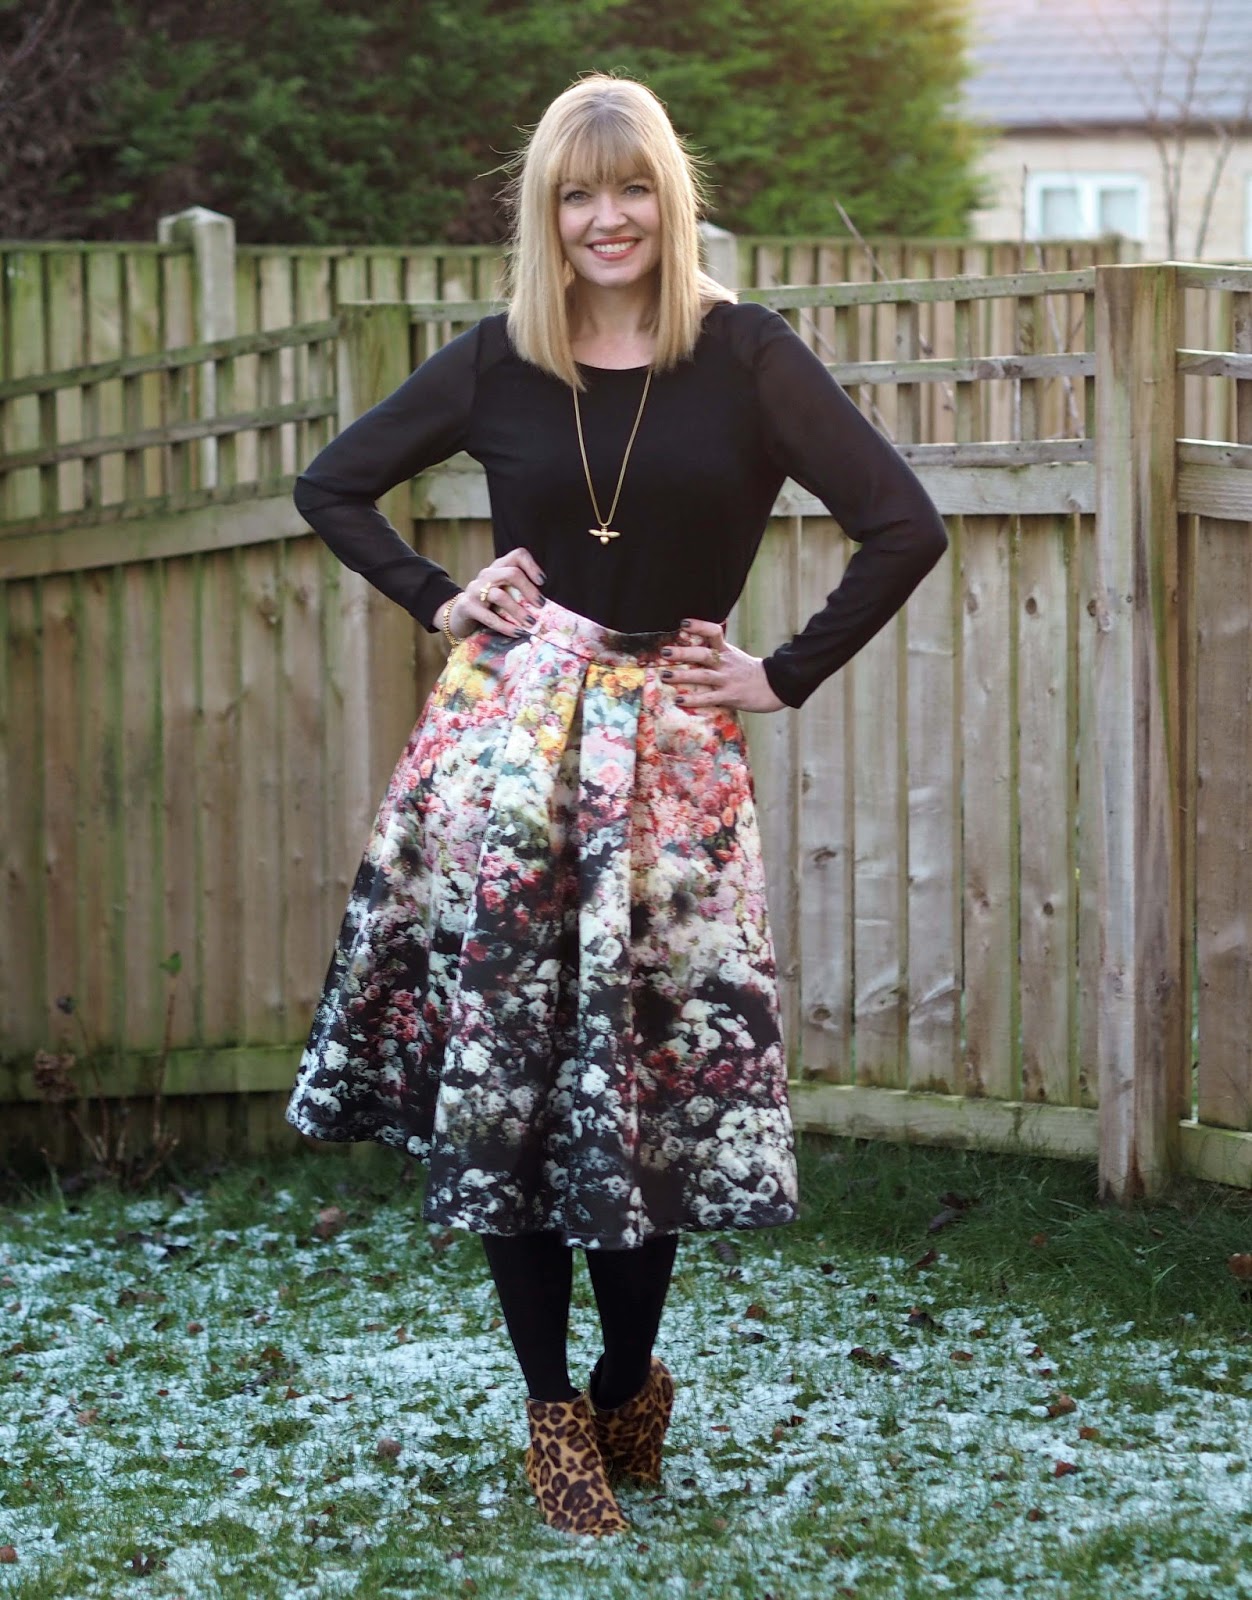 Wearing a Floral Midi Skirt with Leopard Print Boots - What Lizzy Loves